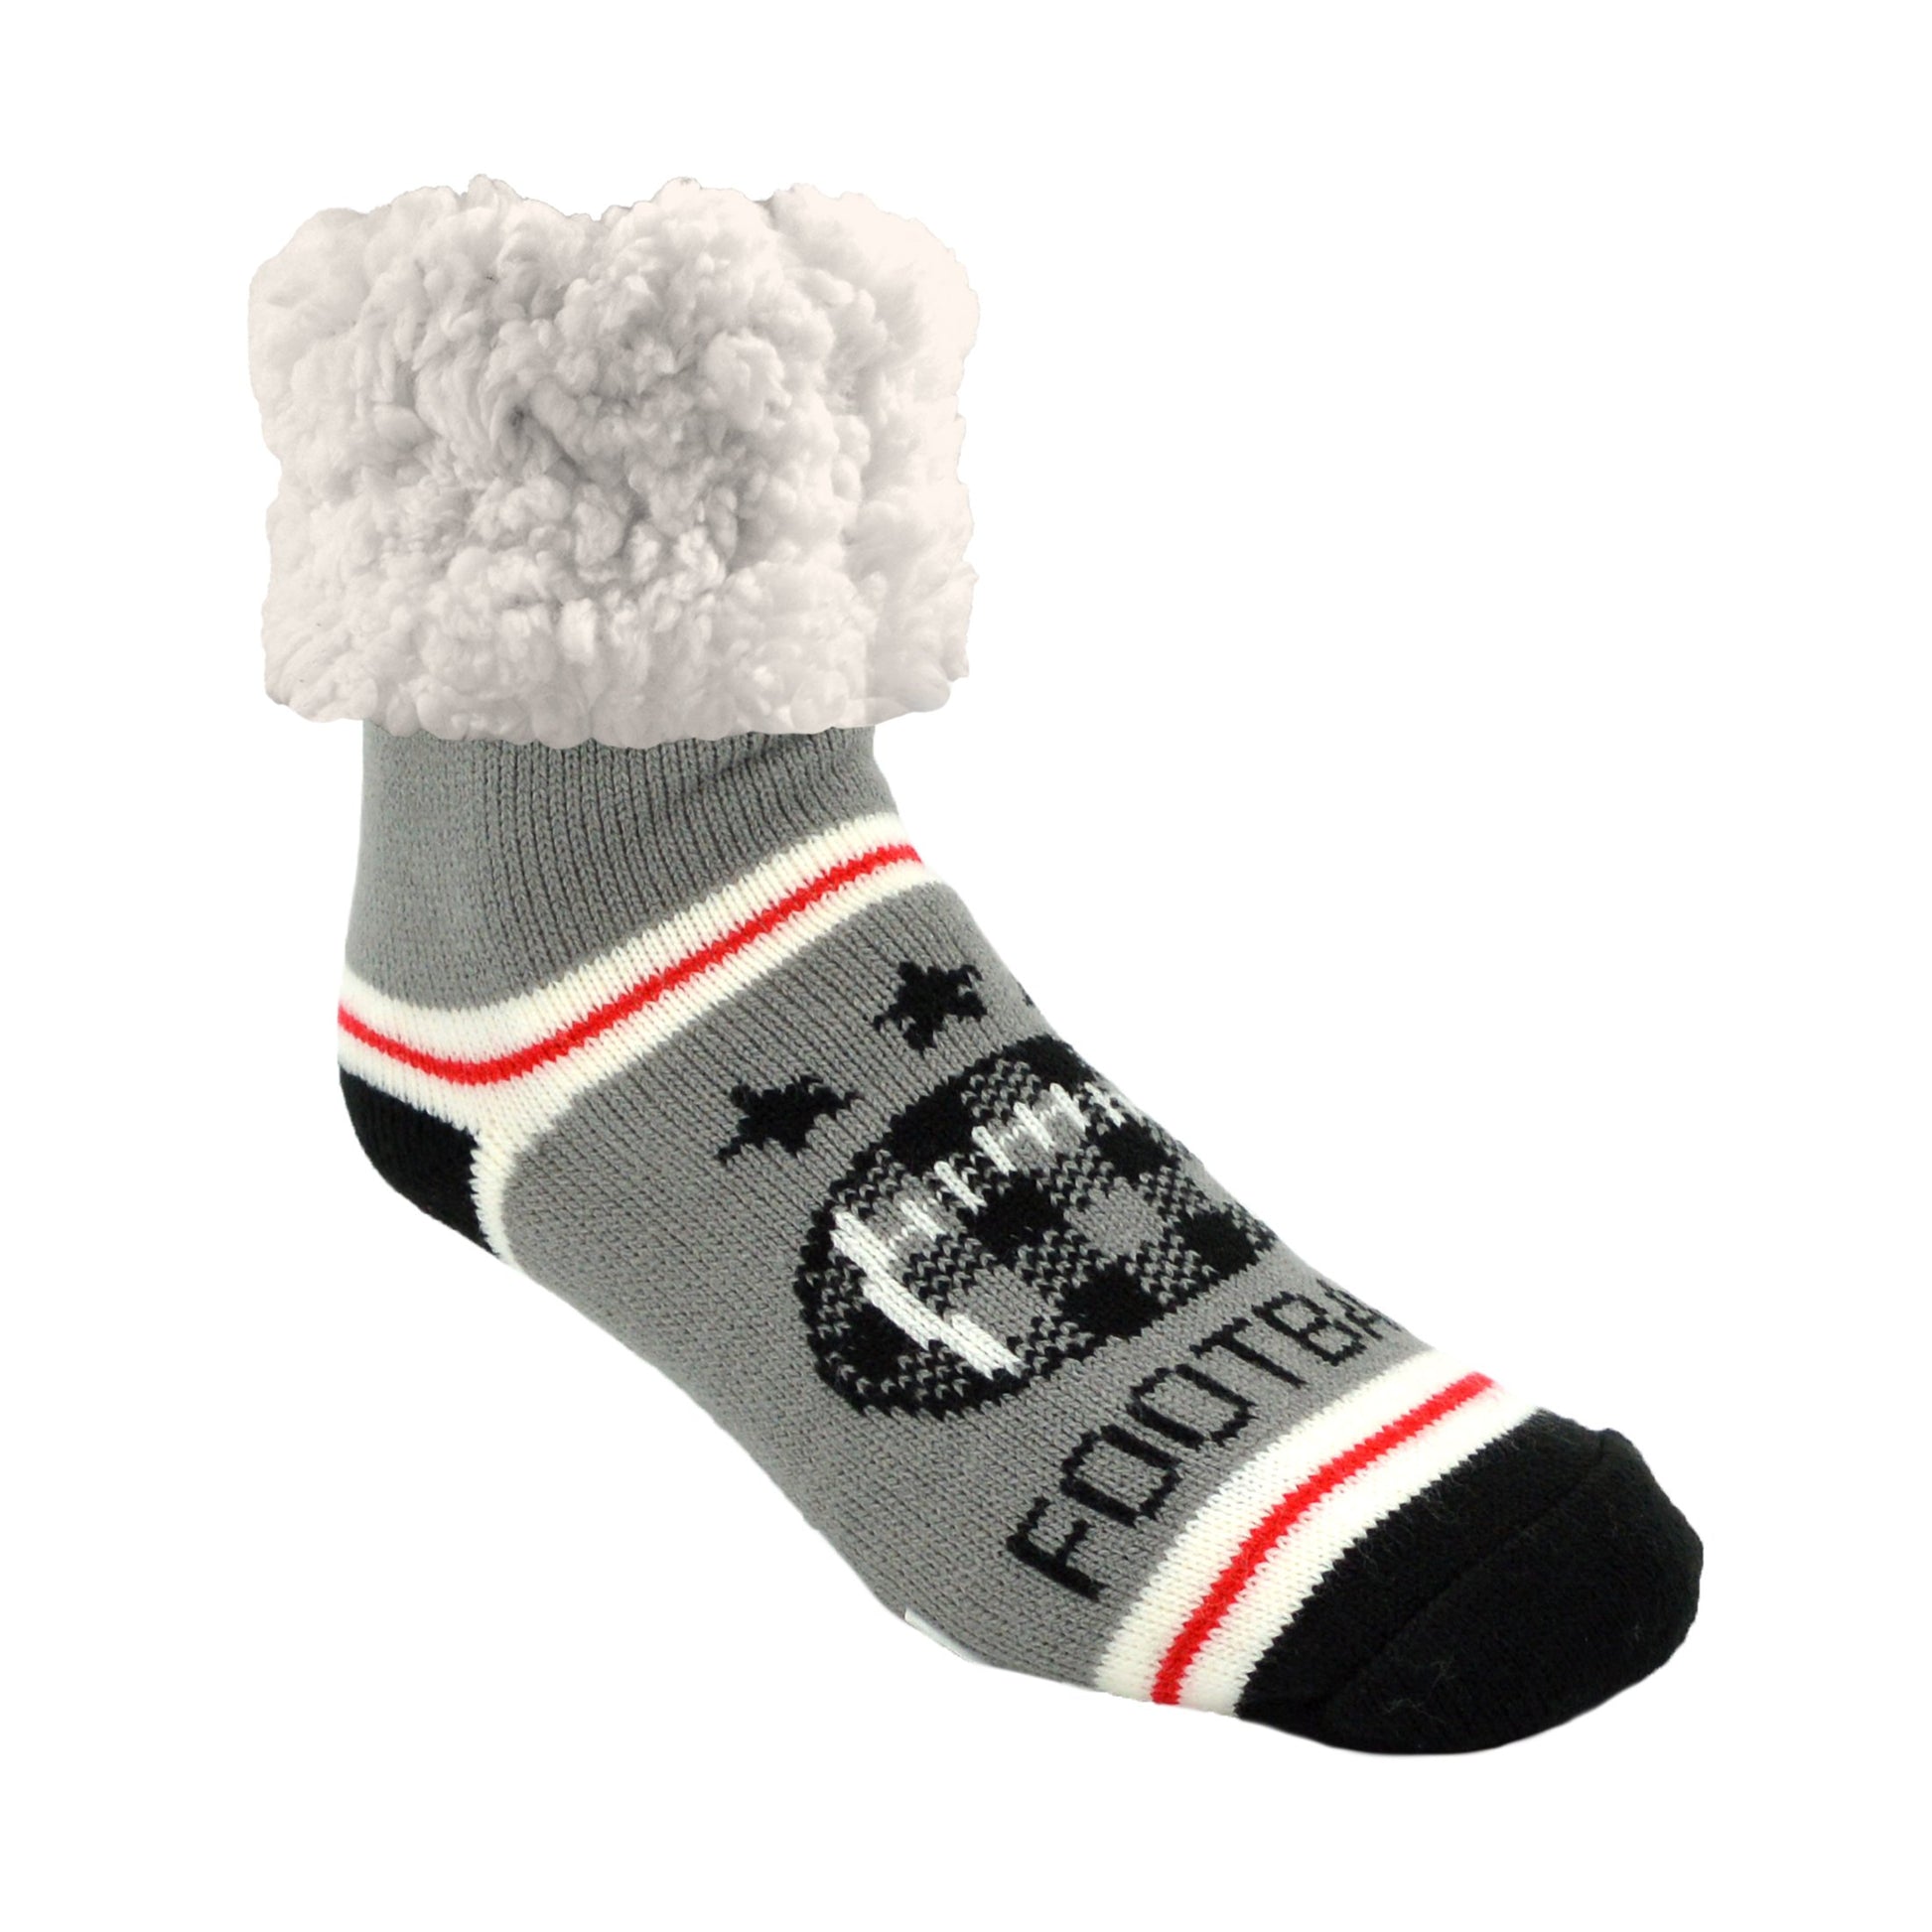 Pudus Cozy Winter Slipper Socks for Women and Men with Non-Slip Grippers and Faux Fur Sherpa Fleece - Adult Regular Fuzzy Socks Football Grey - Classic Slipper Sock